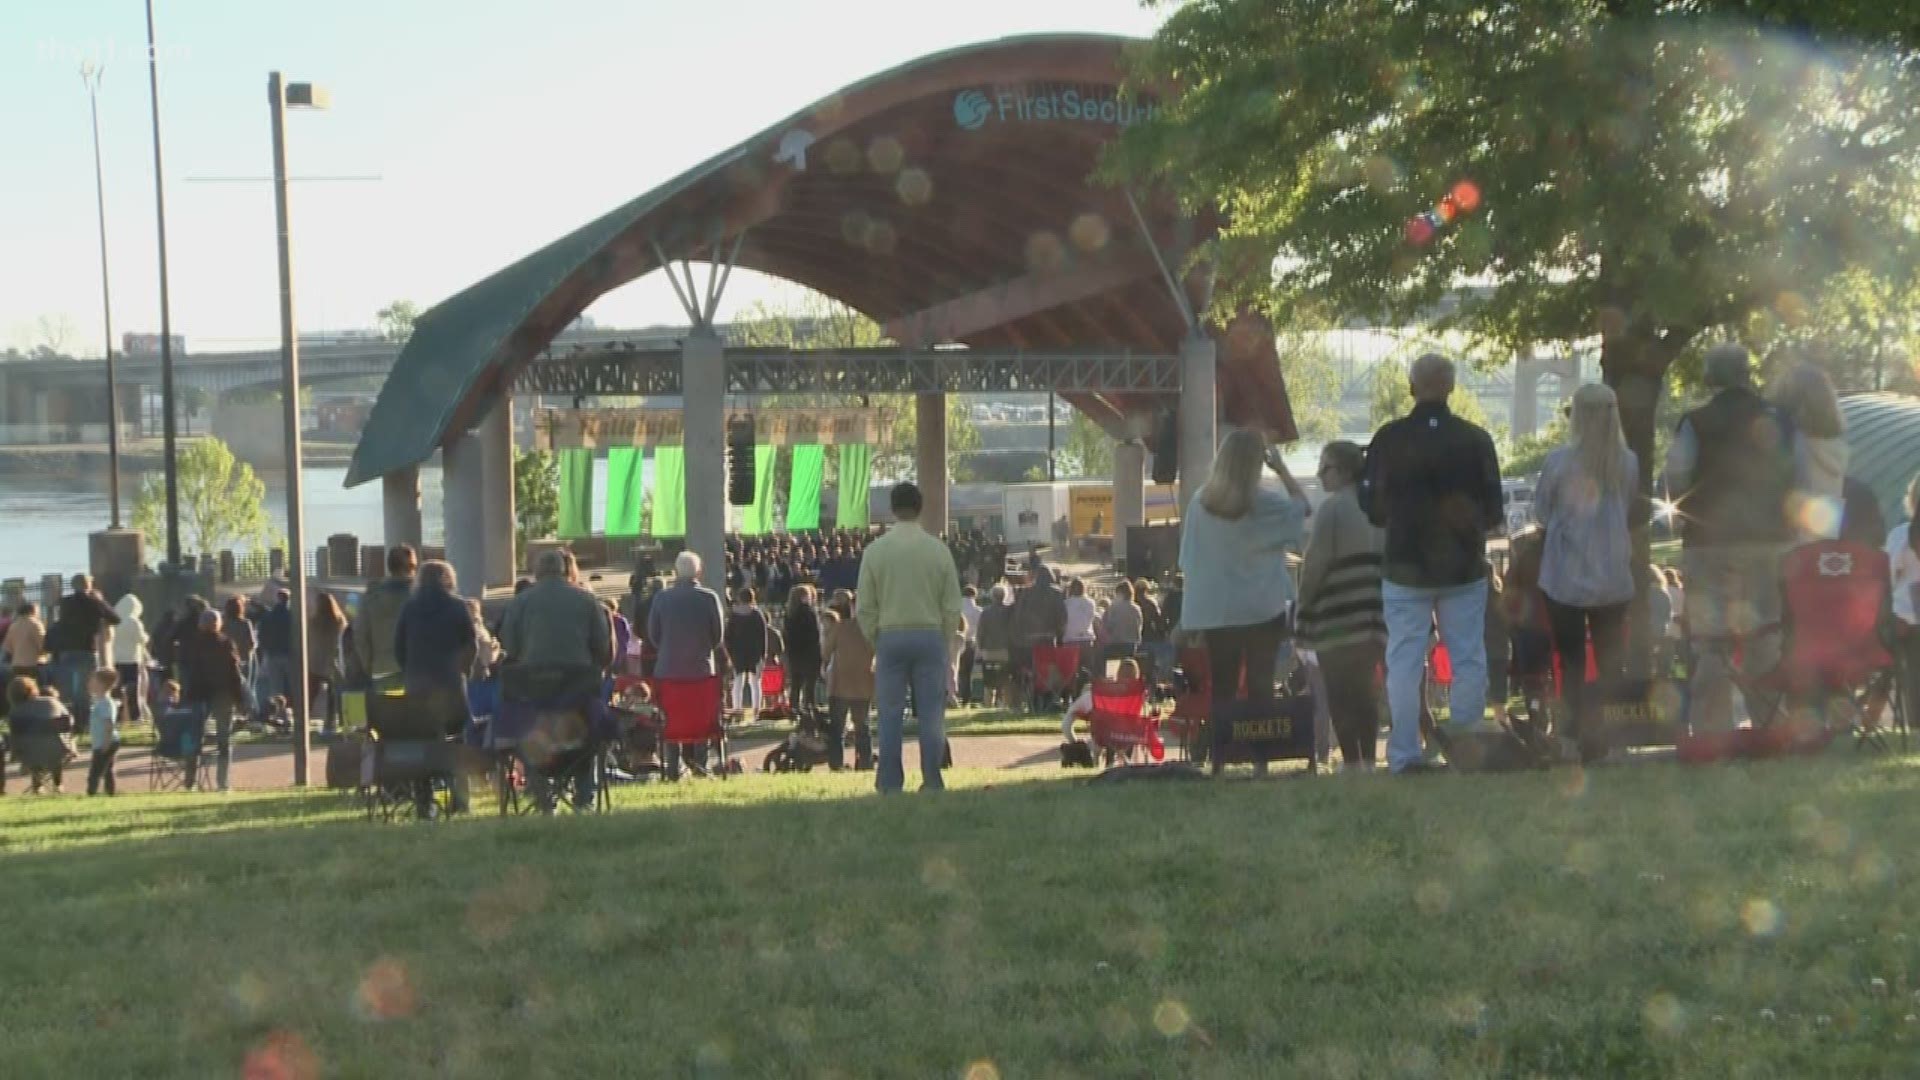 Little Rock residents attend early morning service at Riverfront Park and an Easter egg hunt in celebration.